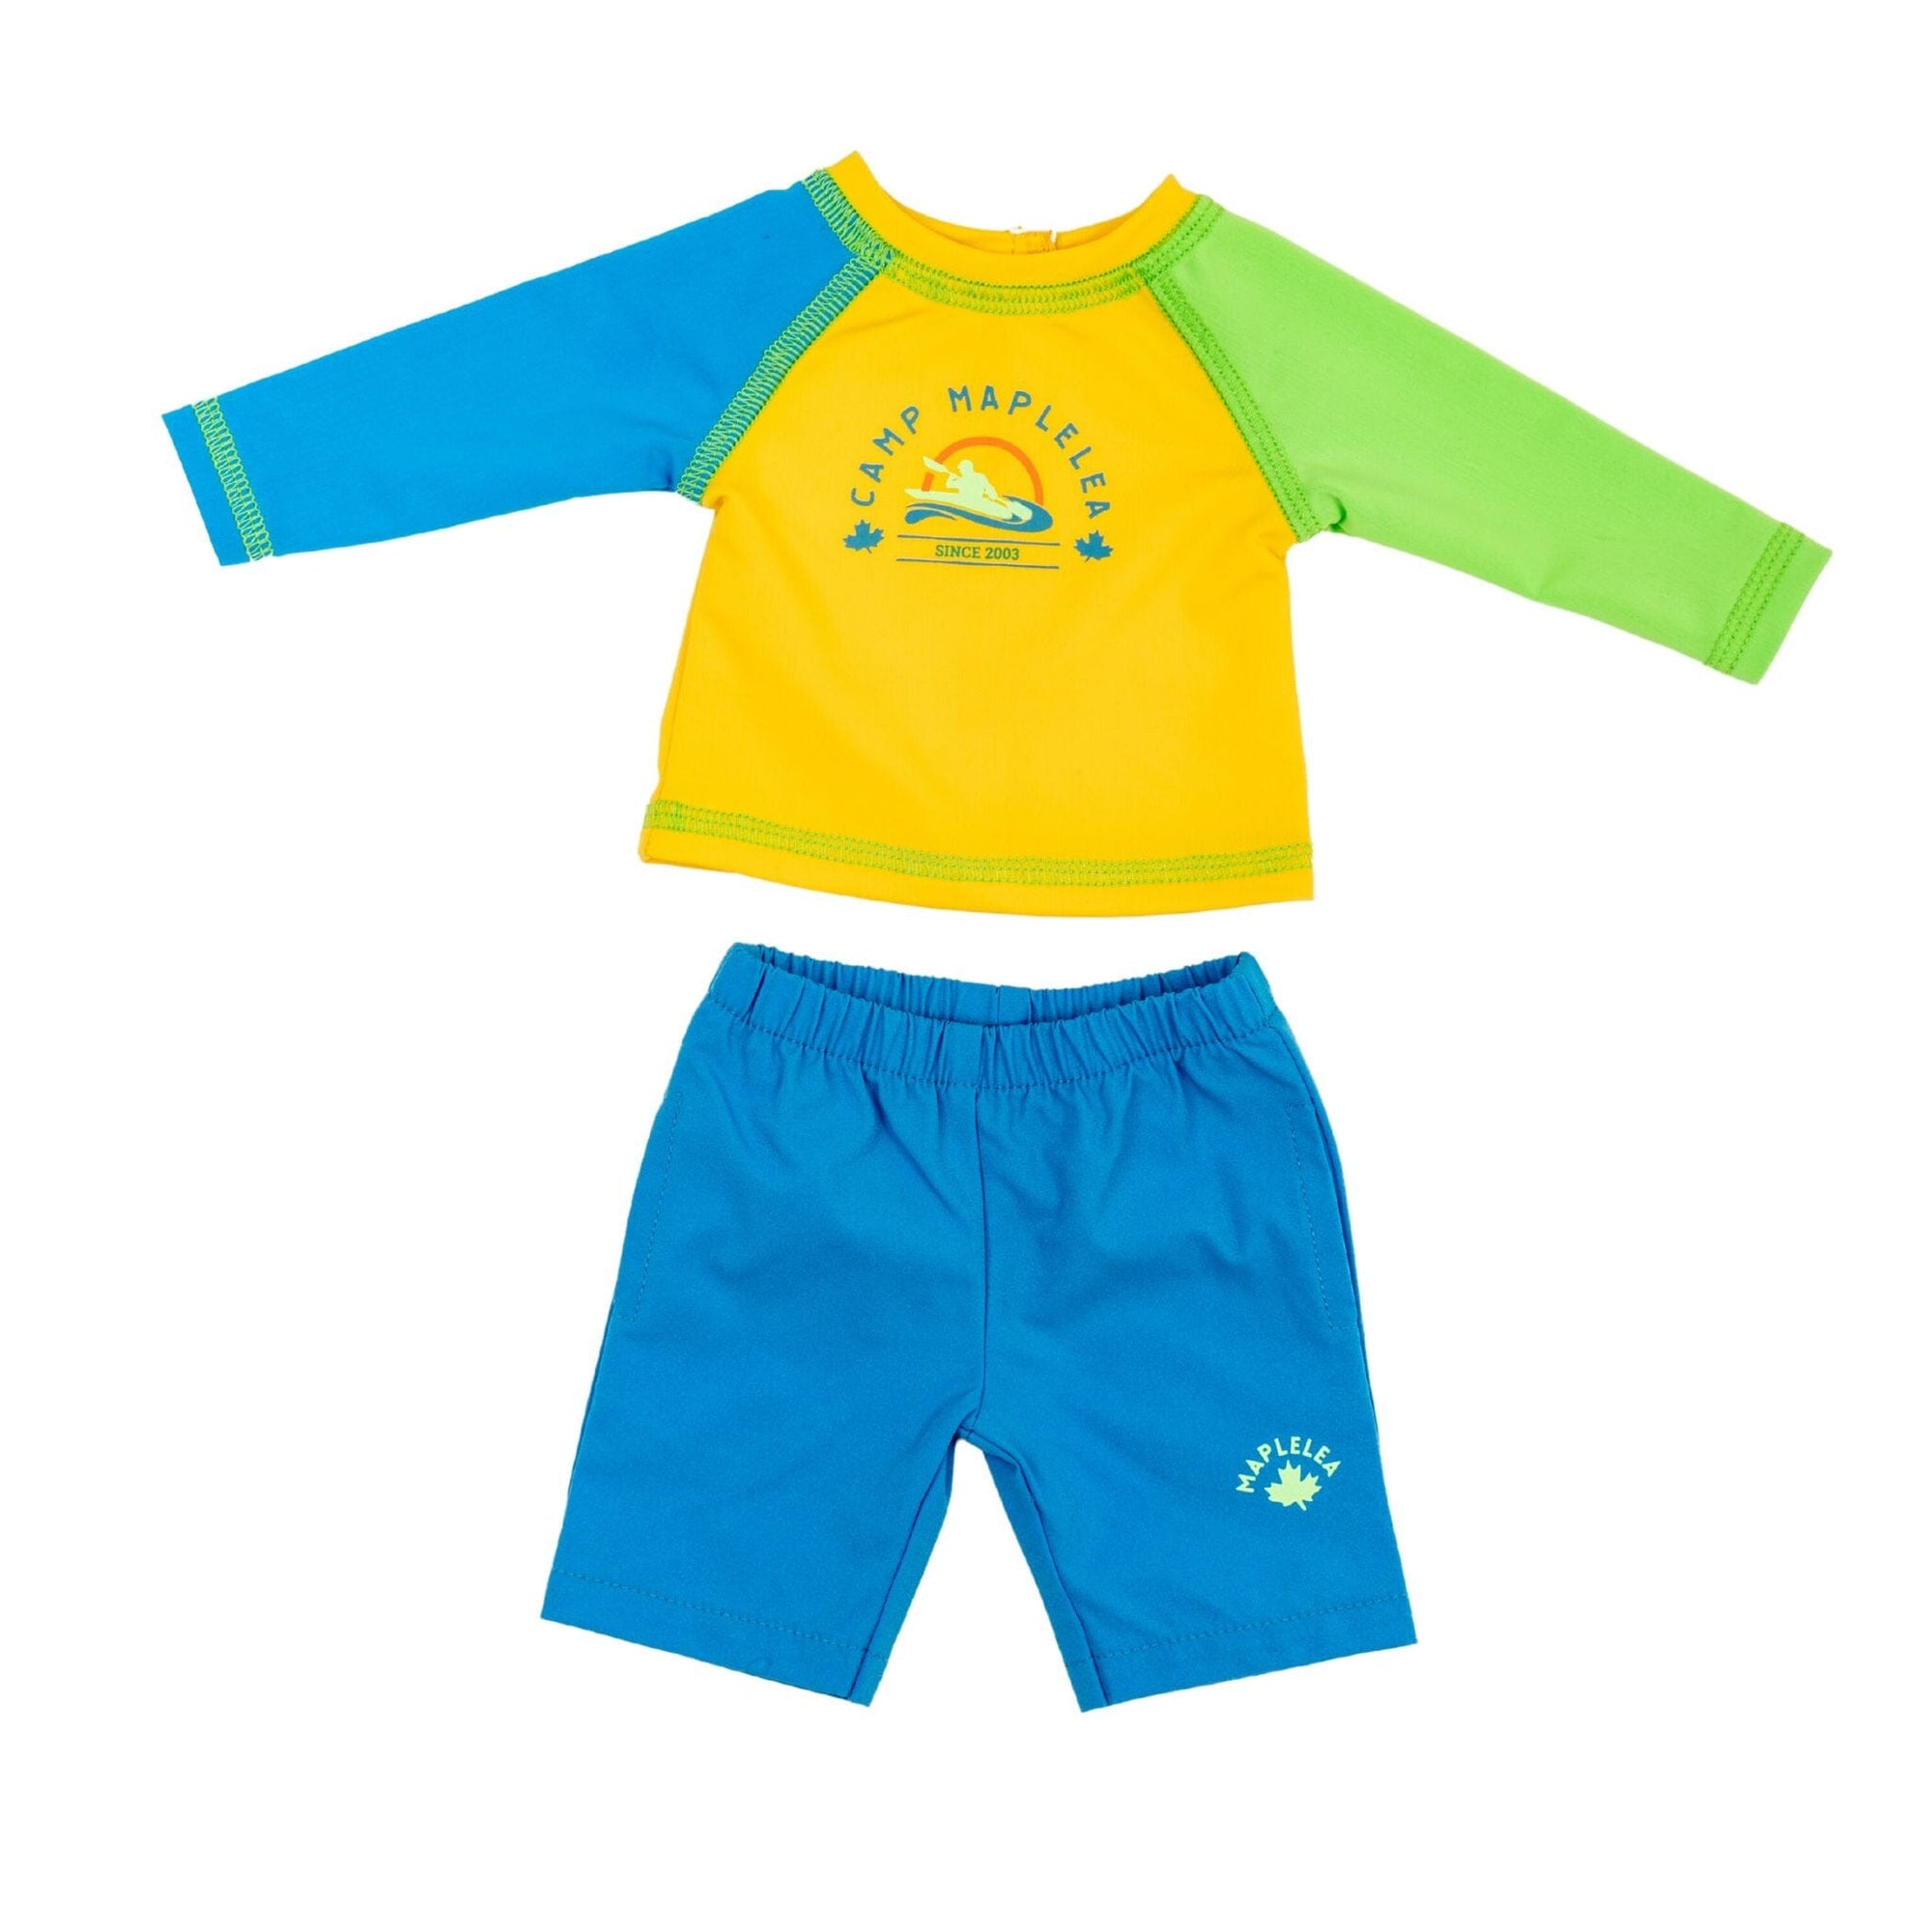 Maplelea swim outfit with top and shorts for all 18 " dolls including Maplelea boy and girl dolls